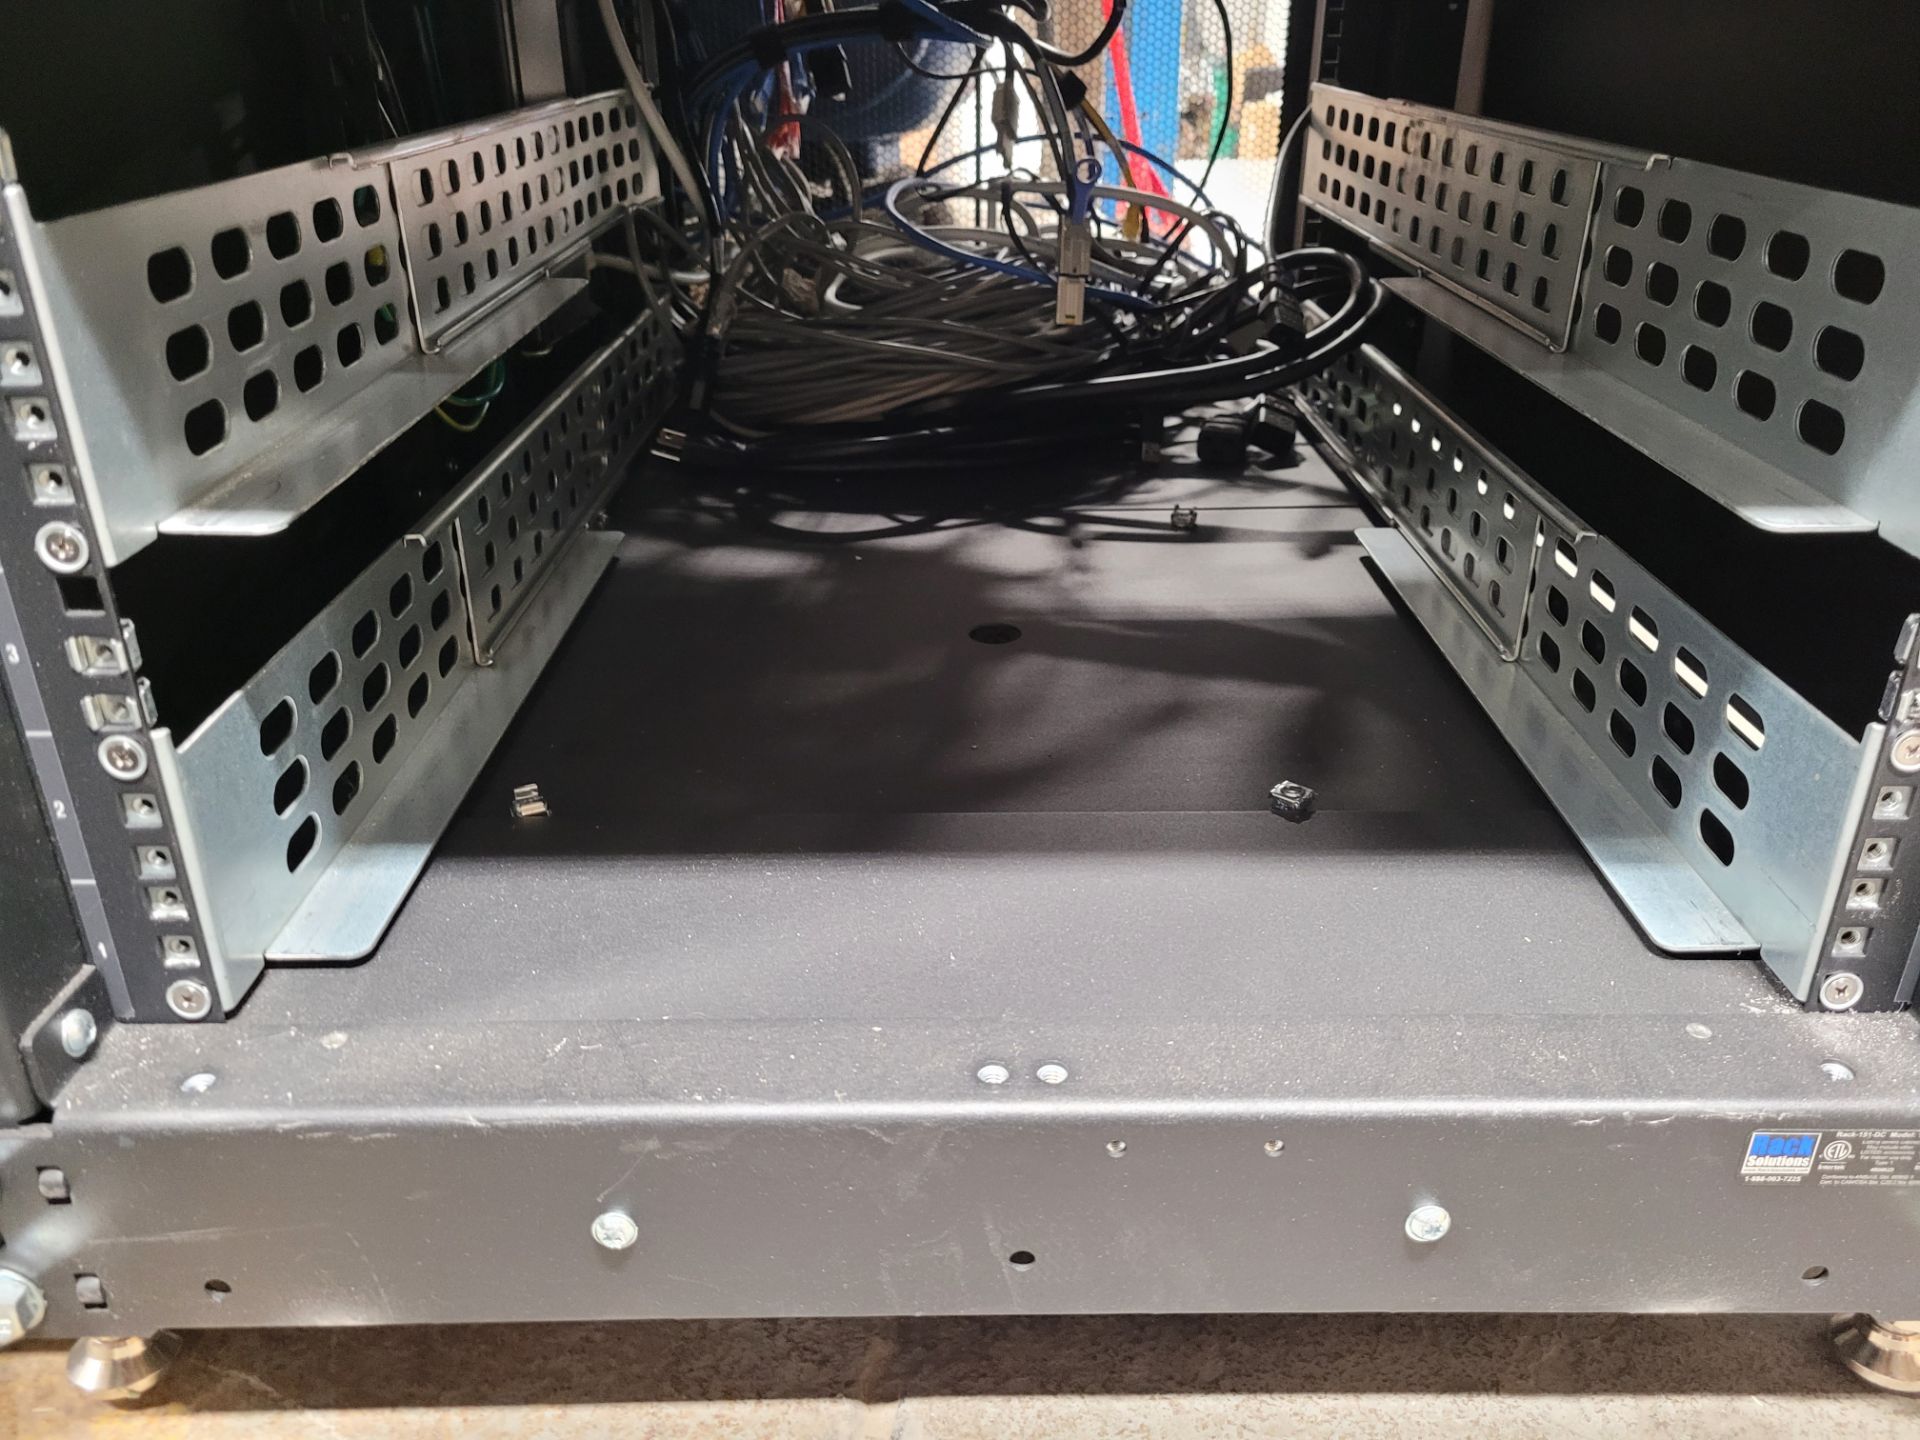 DELL PowerVault Server with Integrated DELL mod. KMMLED185 laptop display, housed in RACK SOLUTIONS - Image 18 of 23